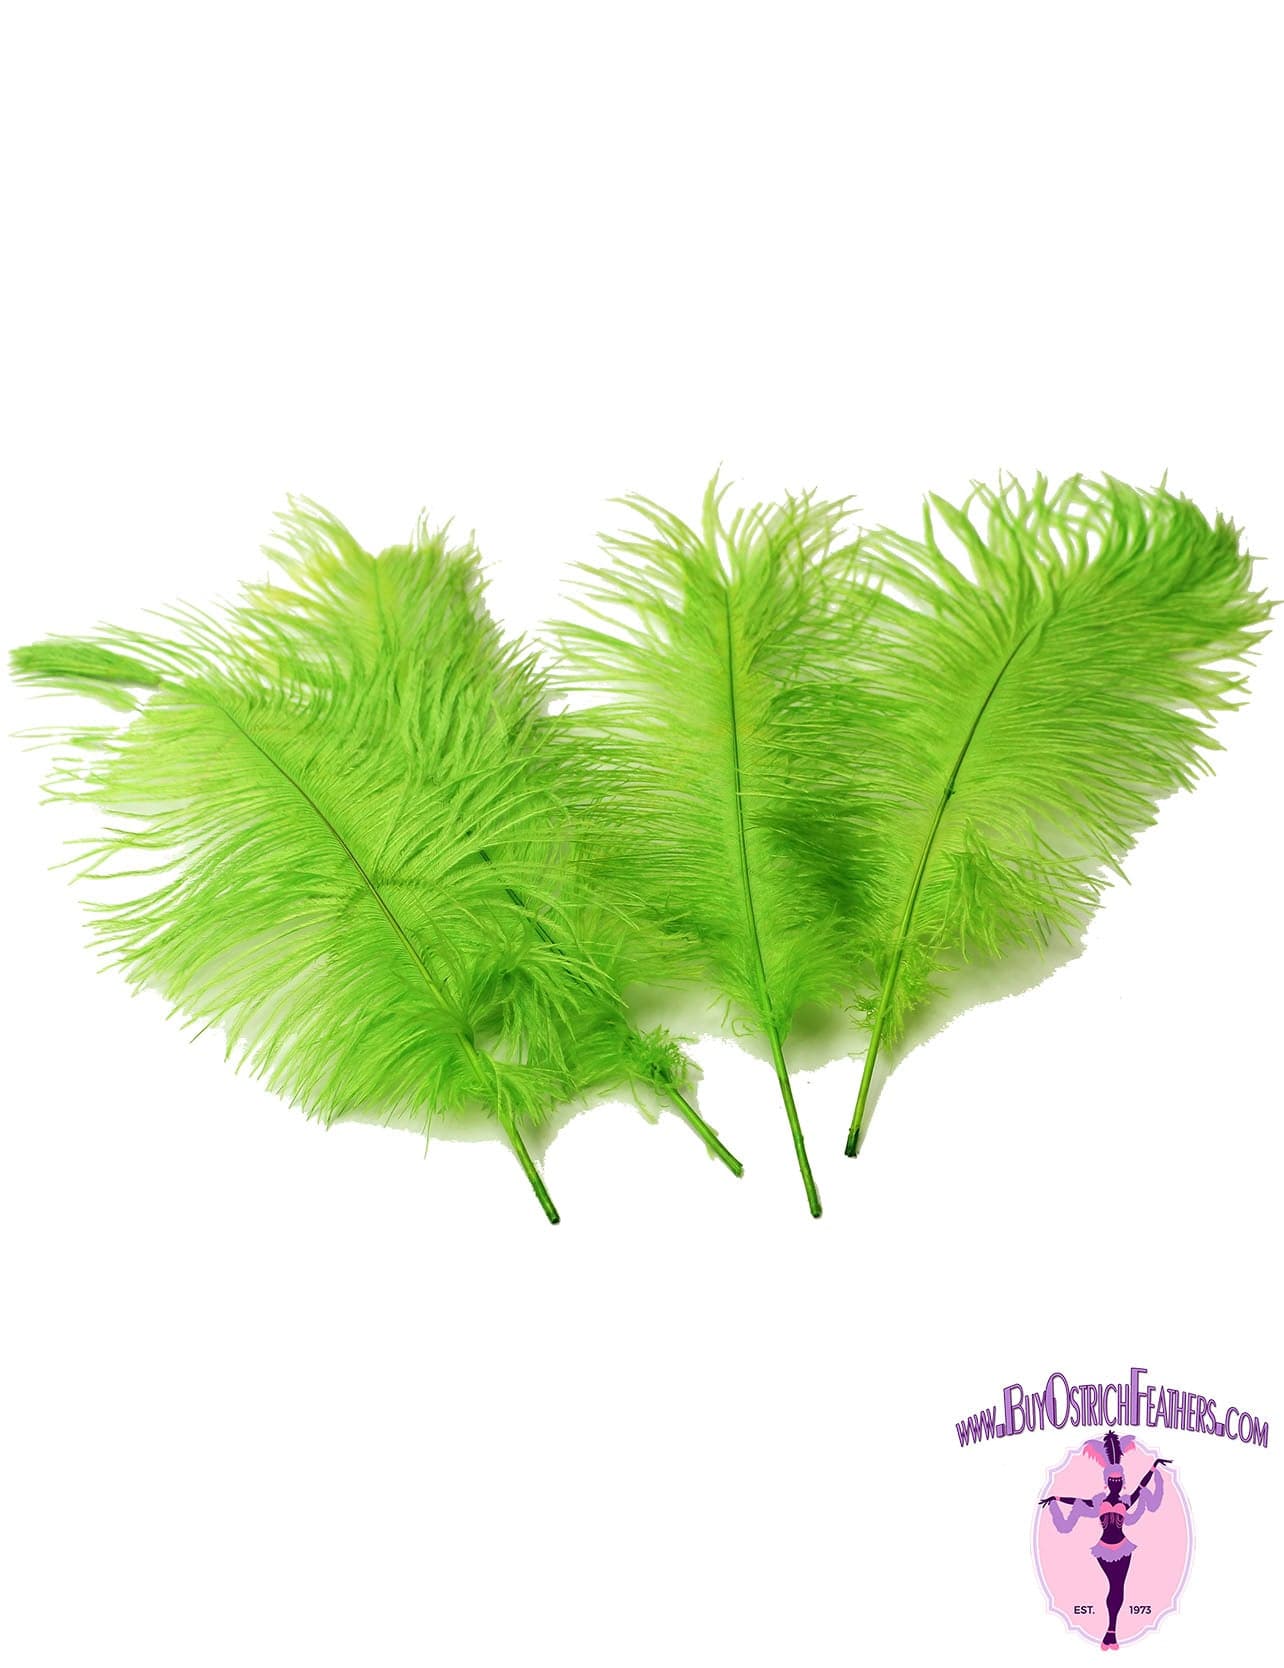 Ostrich Feather Tail Plumes 15-18" (Lime Green) - Buy Ostrich Feathers